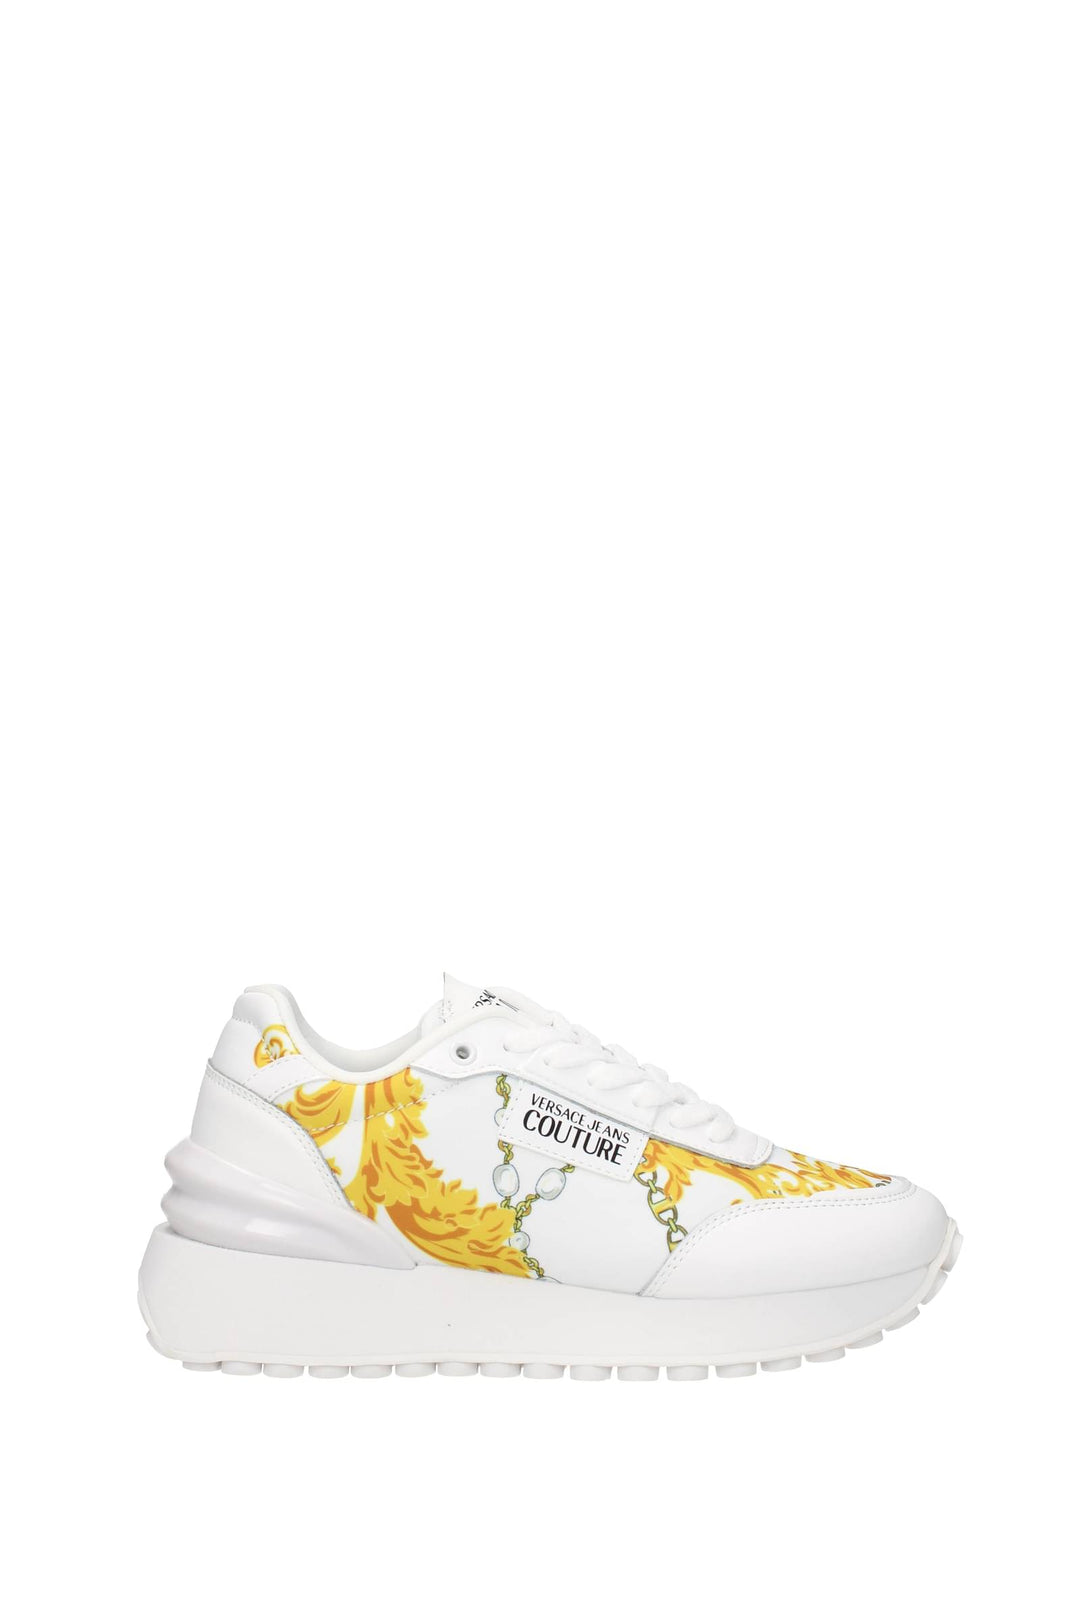 Versace Jeans Sneakers Couture Tessuto Bianco - Versace Jeans Couture - Donna